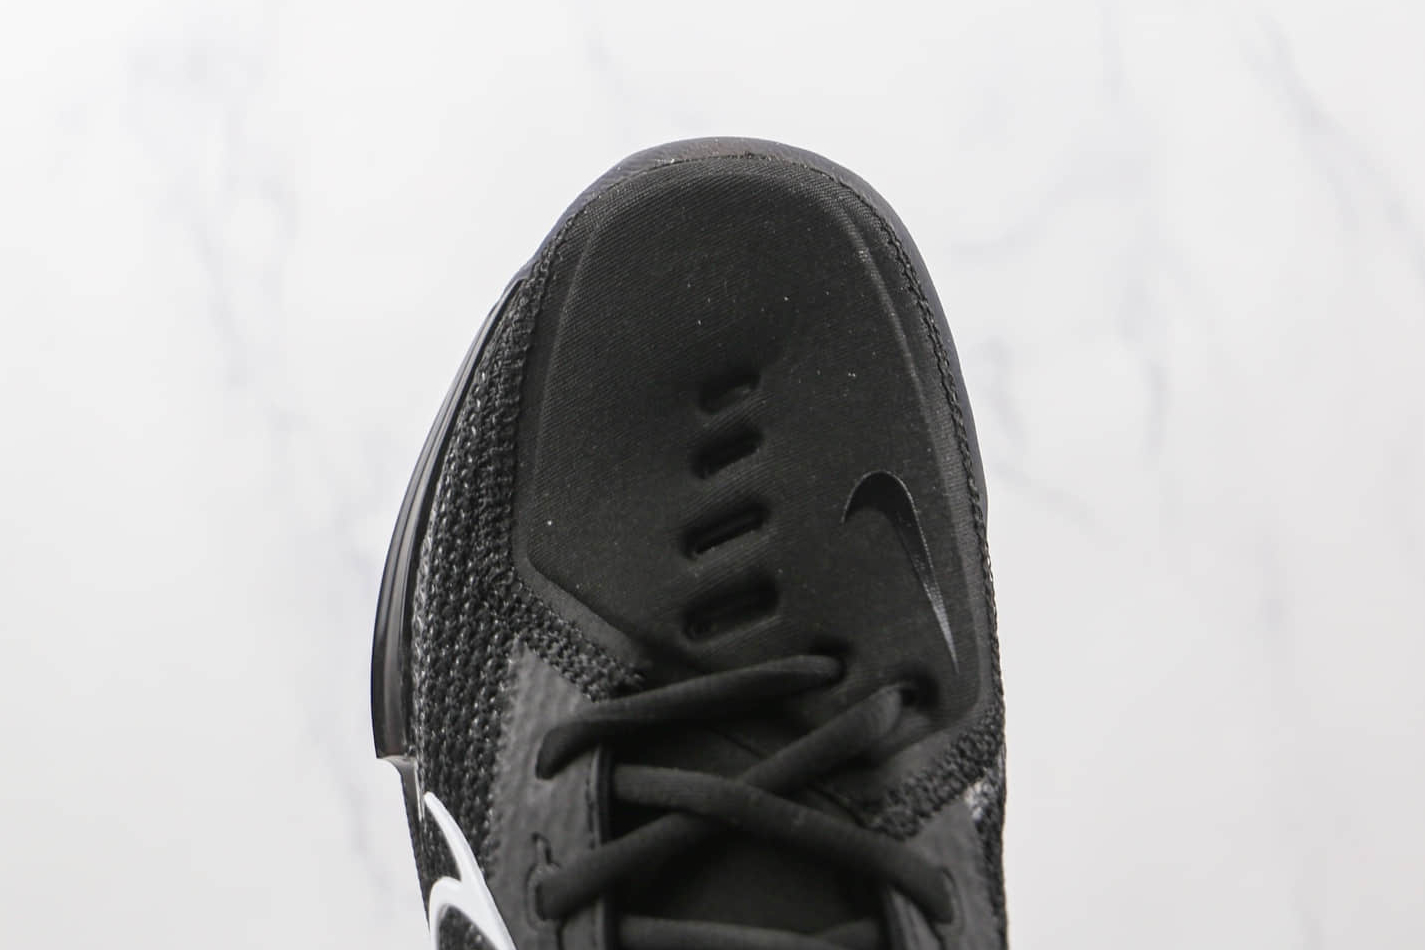 Nike Air Zoom GT Cut Black White Shoes CZ0176-002 | Premium Performance Footwear for Athletes